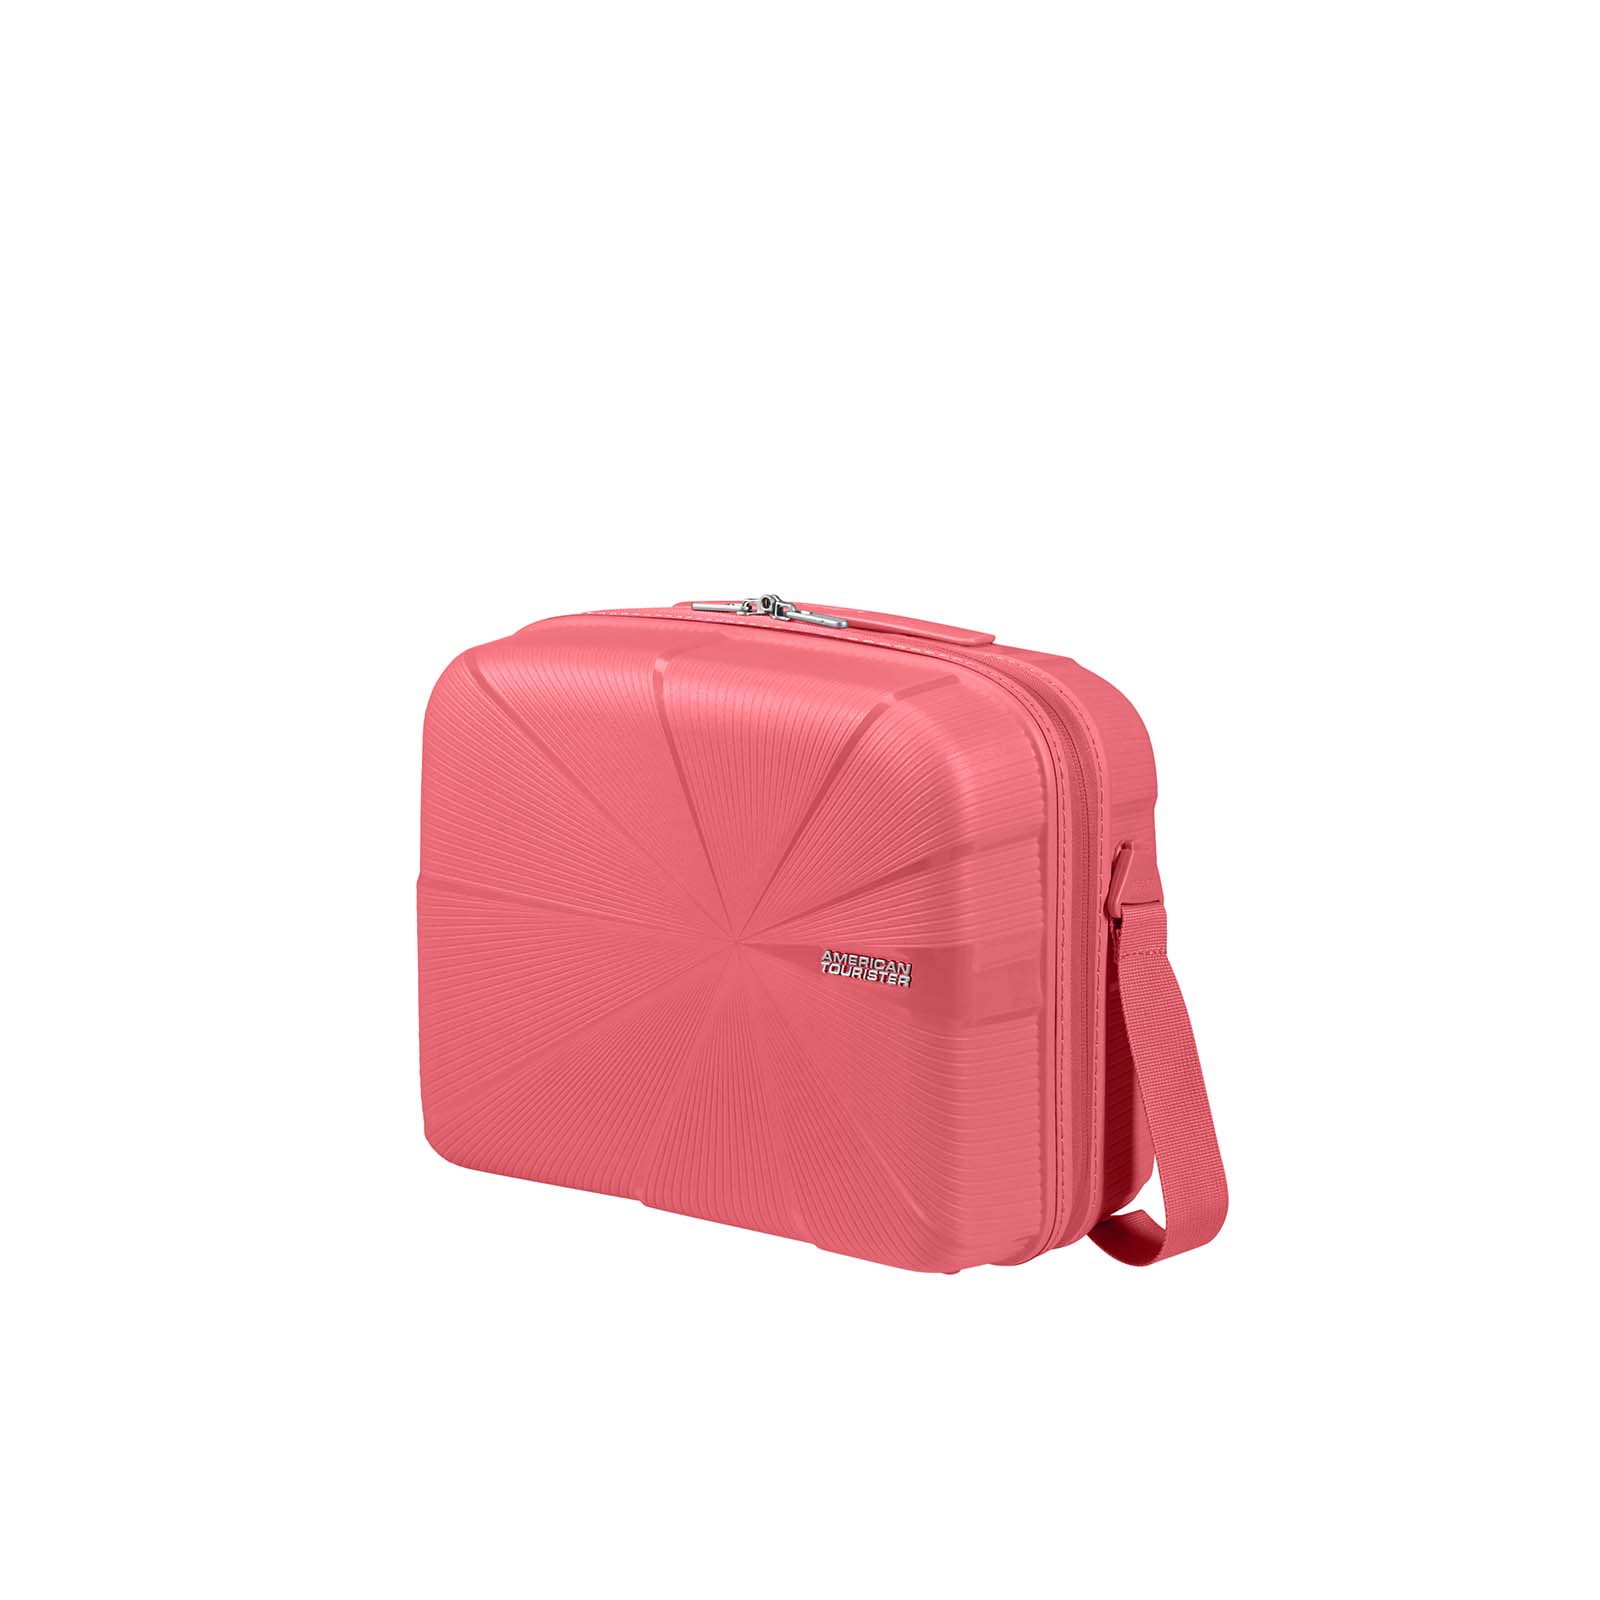 American-Tourister-Starvibe-Beauty-Case-Coral-Angle